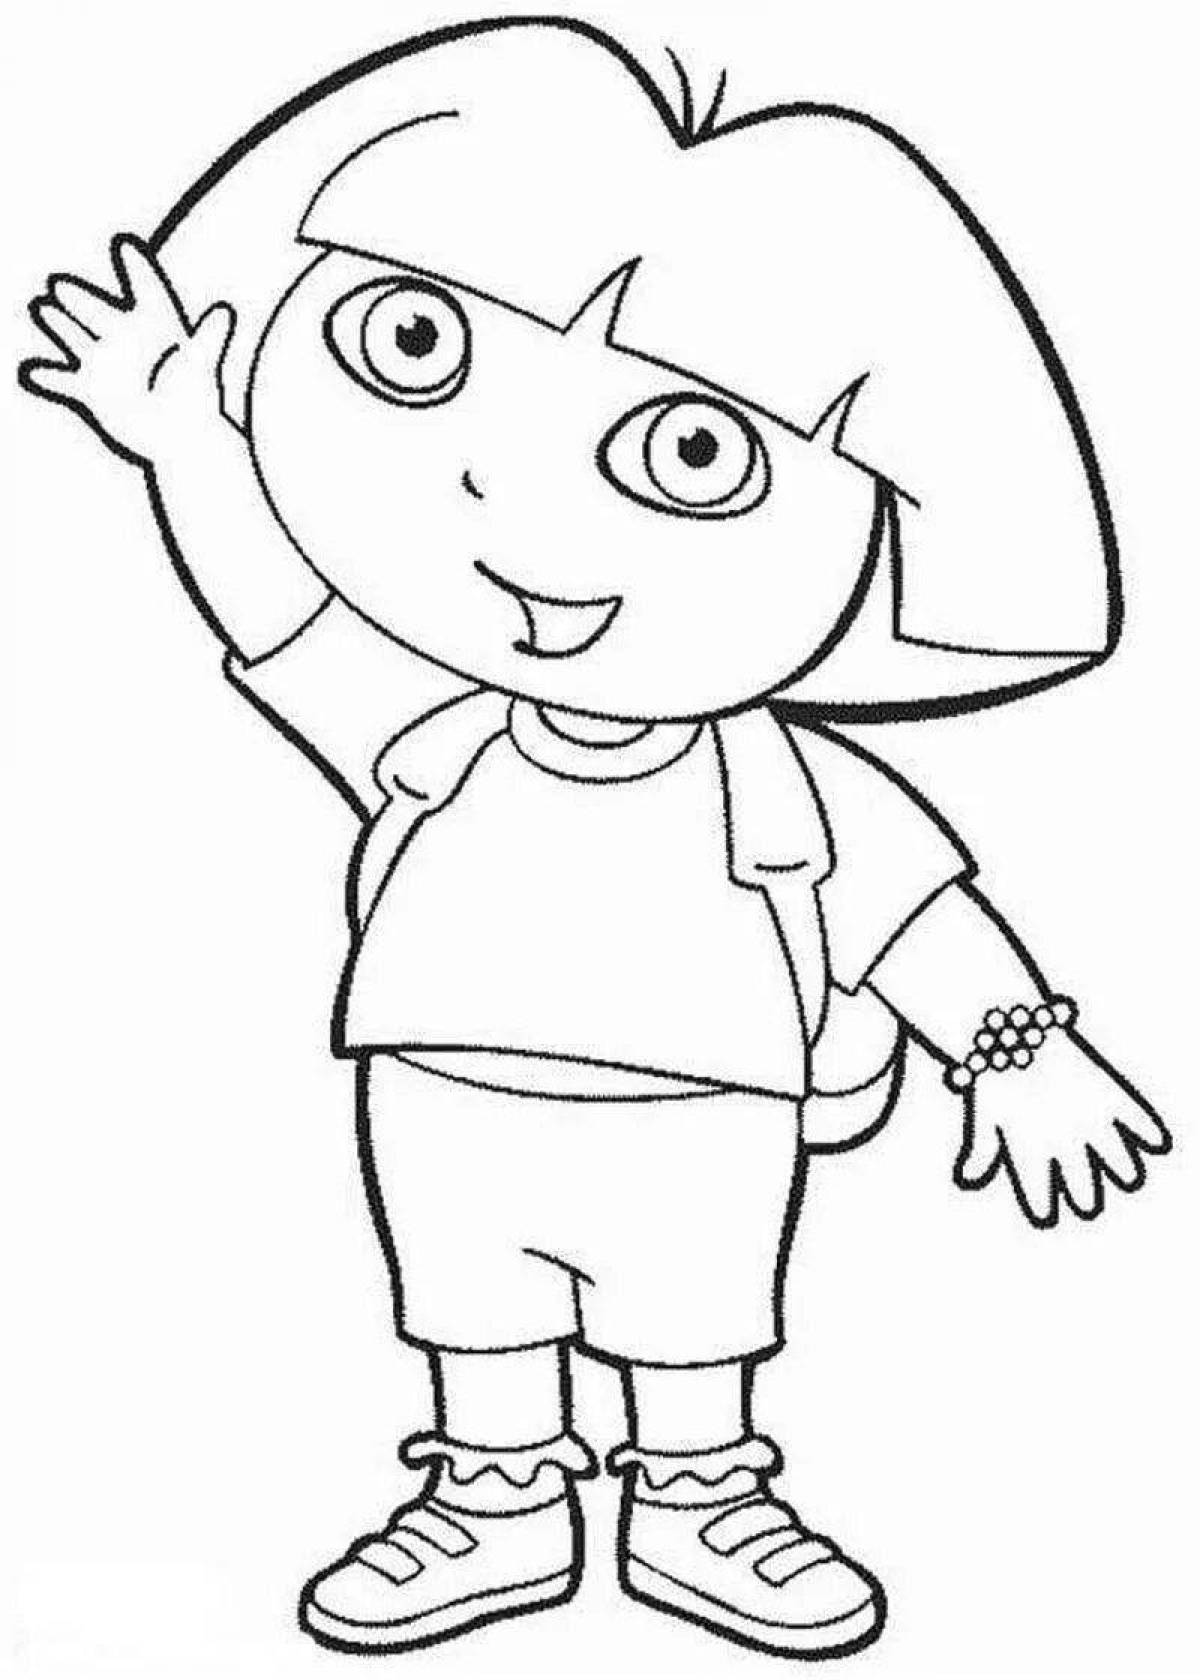 Amazing cartoon characters coloring pages for kids